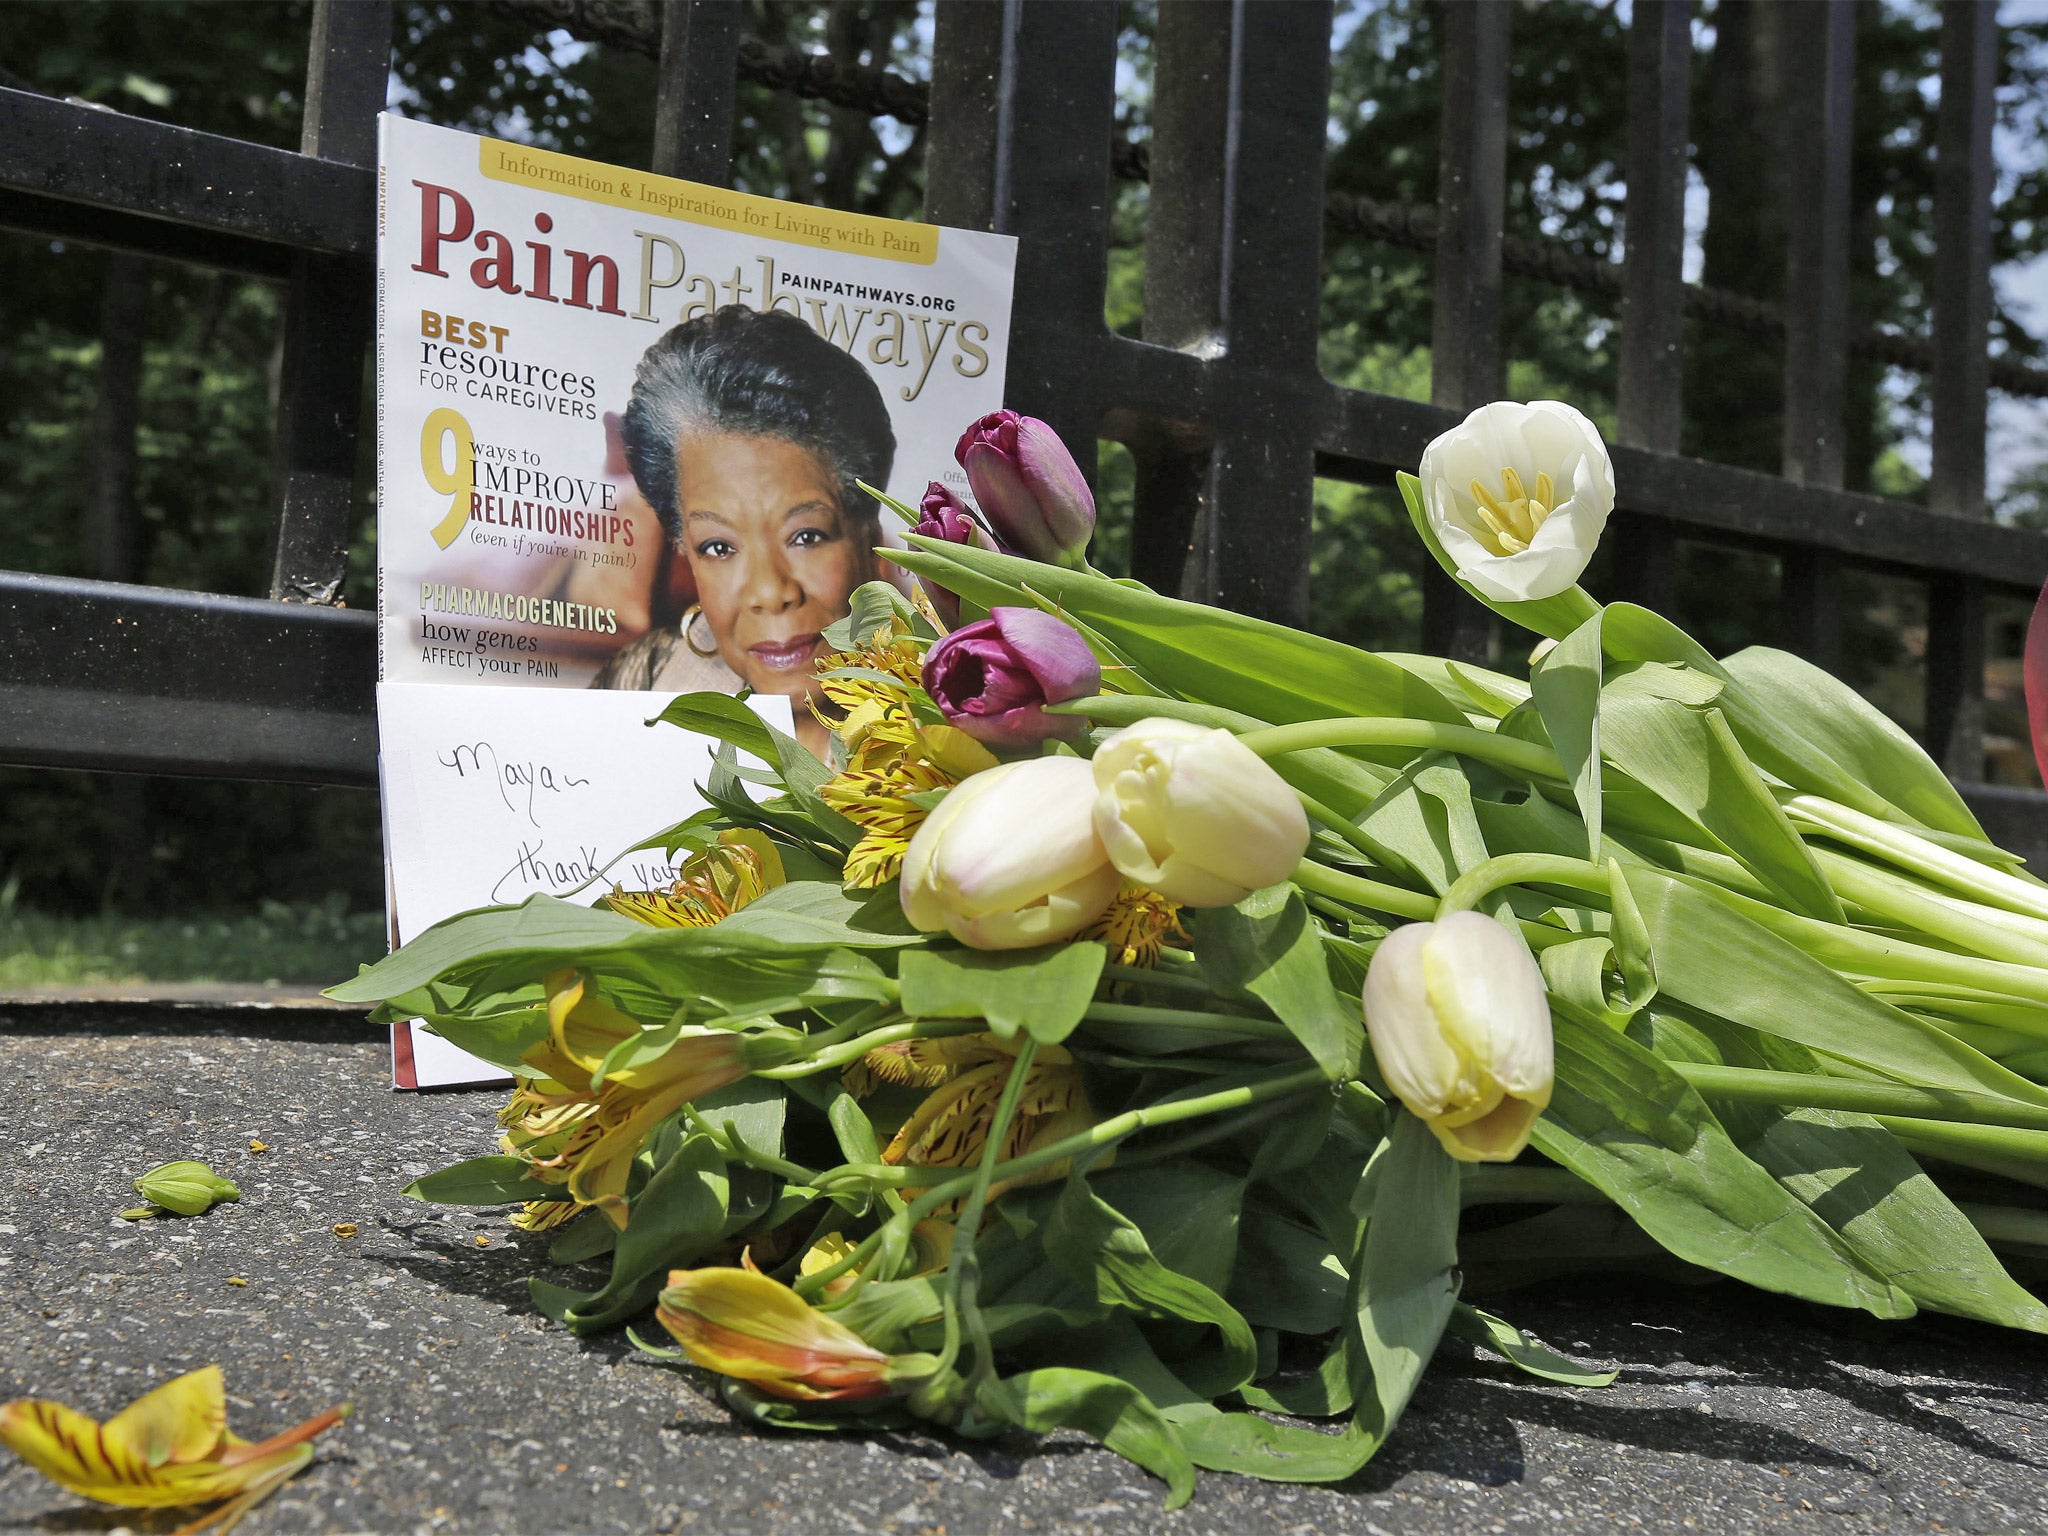 A bouquet of flowers and a magazine showing Maya Angelou on the cover lie outside her home